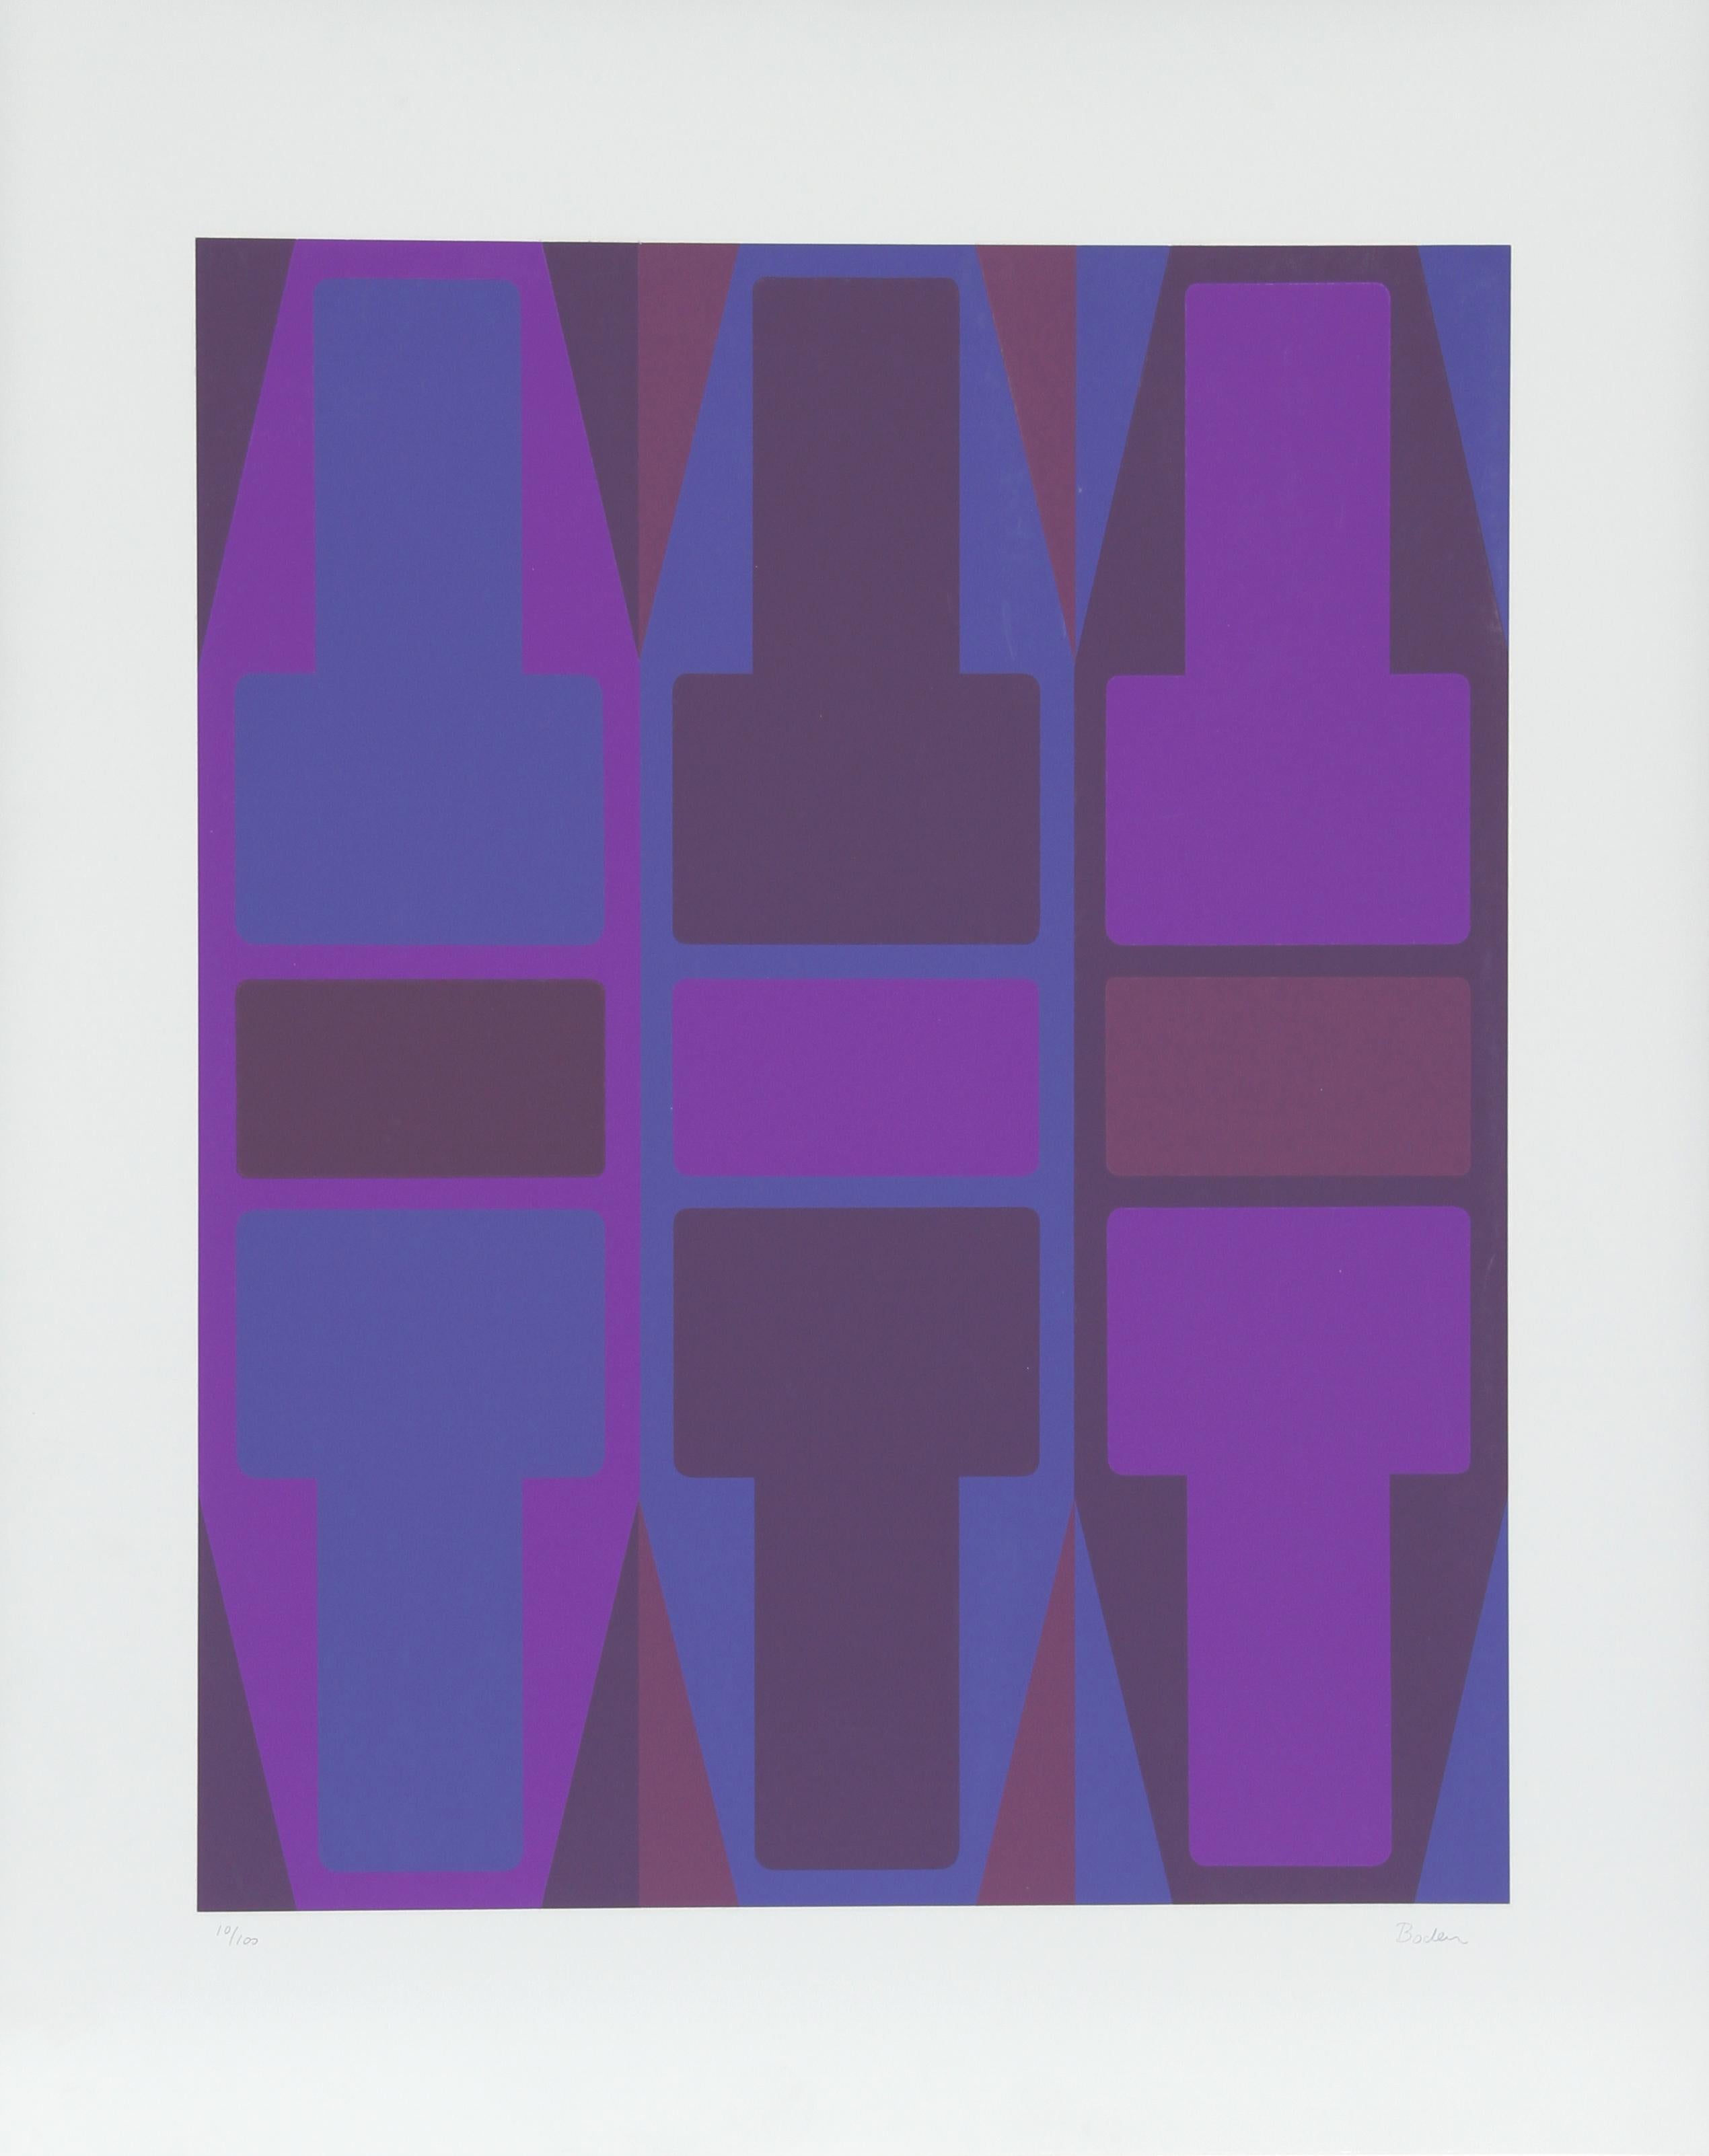 Artist: Arthur Boden, American
Title: T Series (Purple)
Year:  circa 1970
Medium:  Serigraph, signed and numbered in pencil
Edition:  100
Size:  29 in. x 23 in. (73.66 cm x 58.42 cm) 